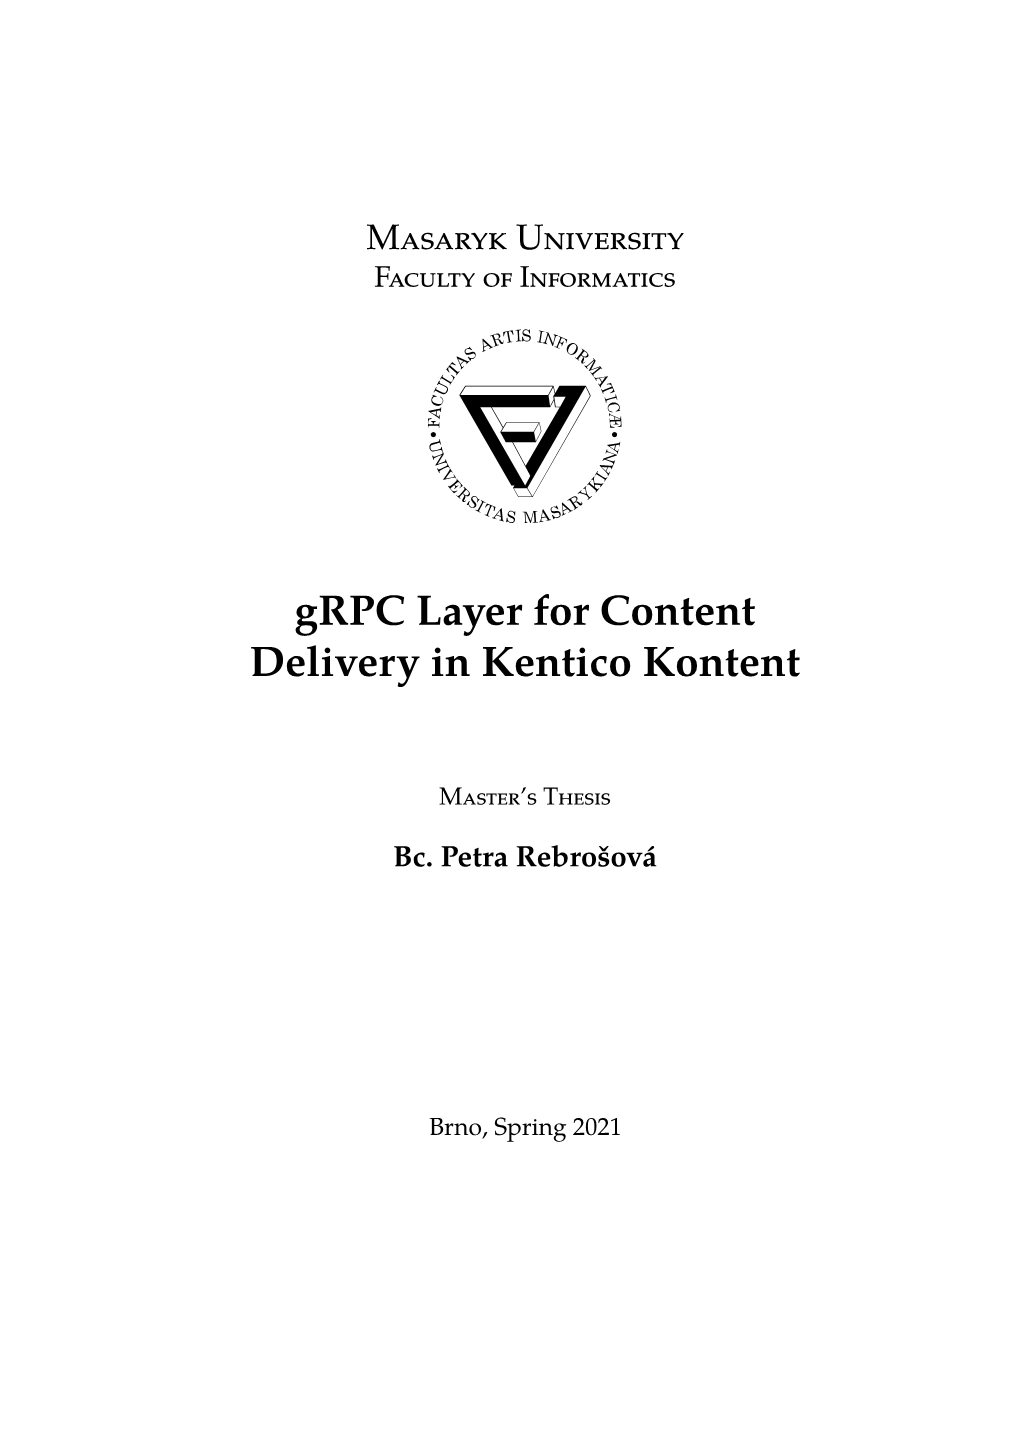 Grpc Layer for Content Delivery in Kentico Kontent